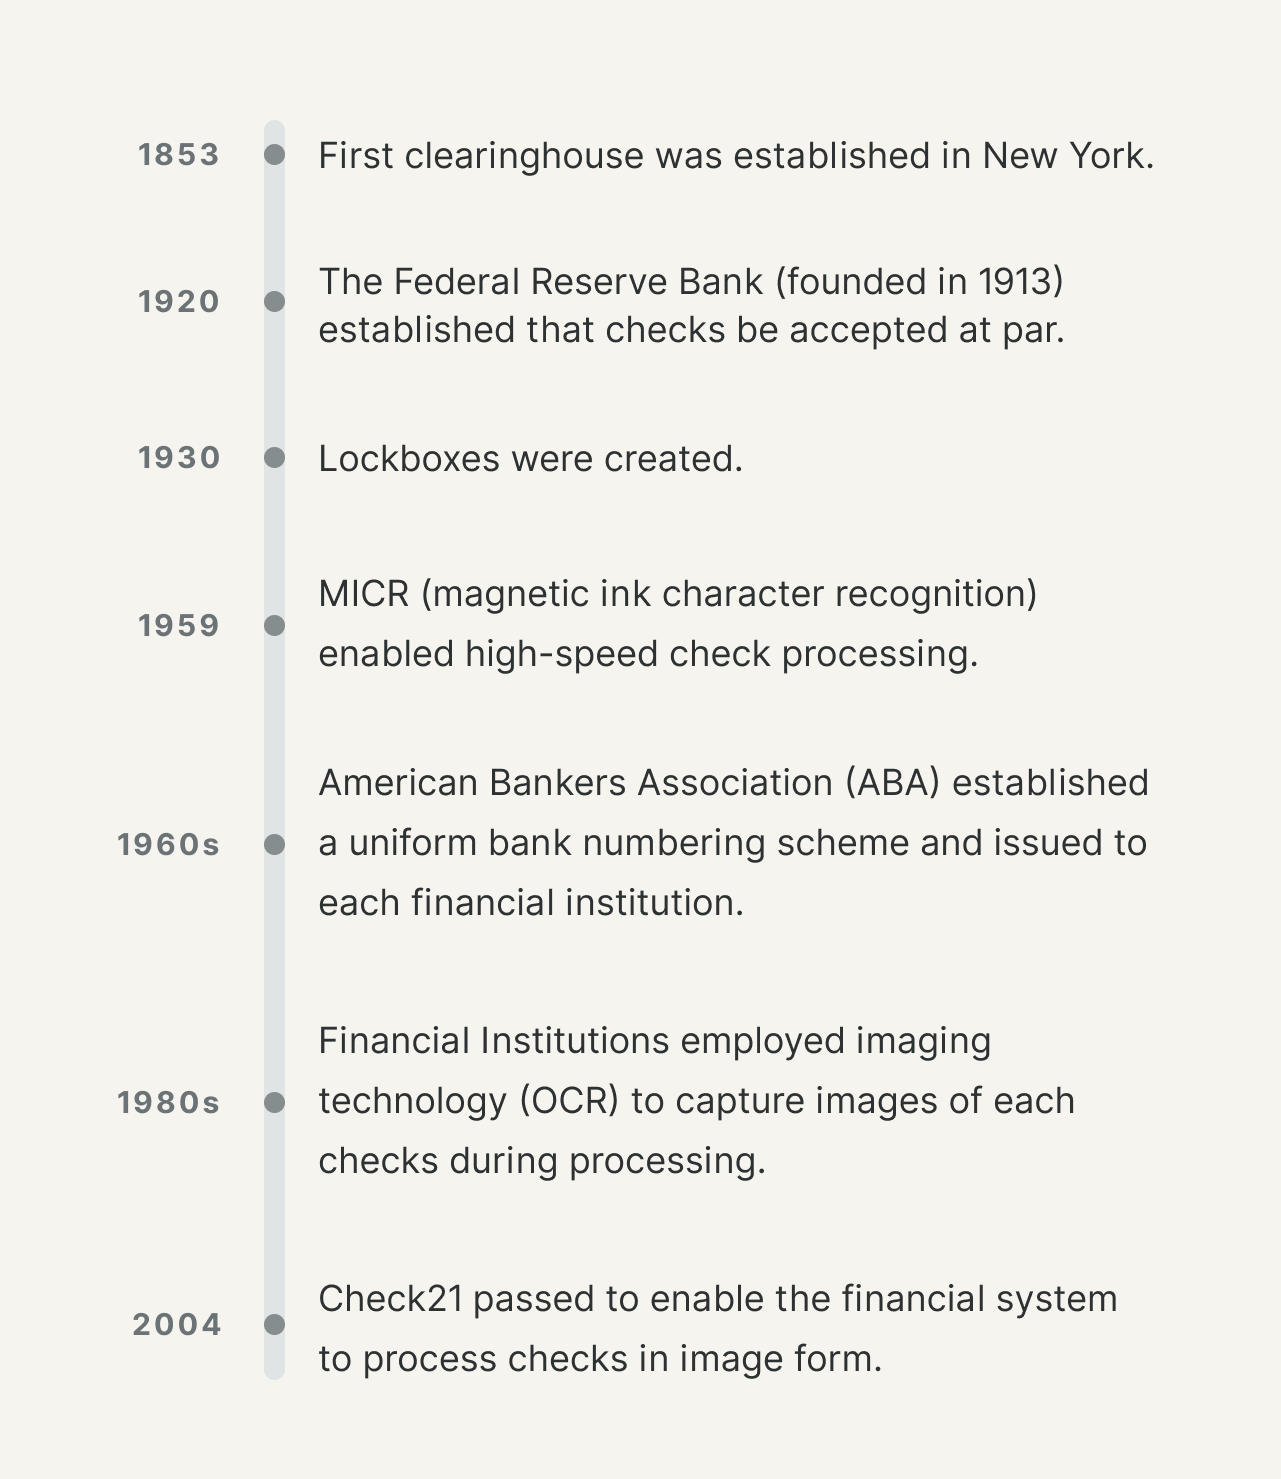 A timeline of technical innovations for checks